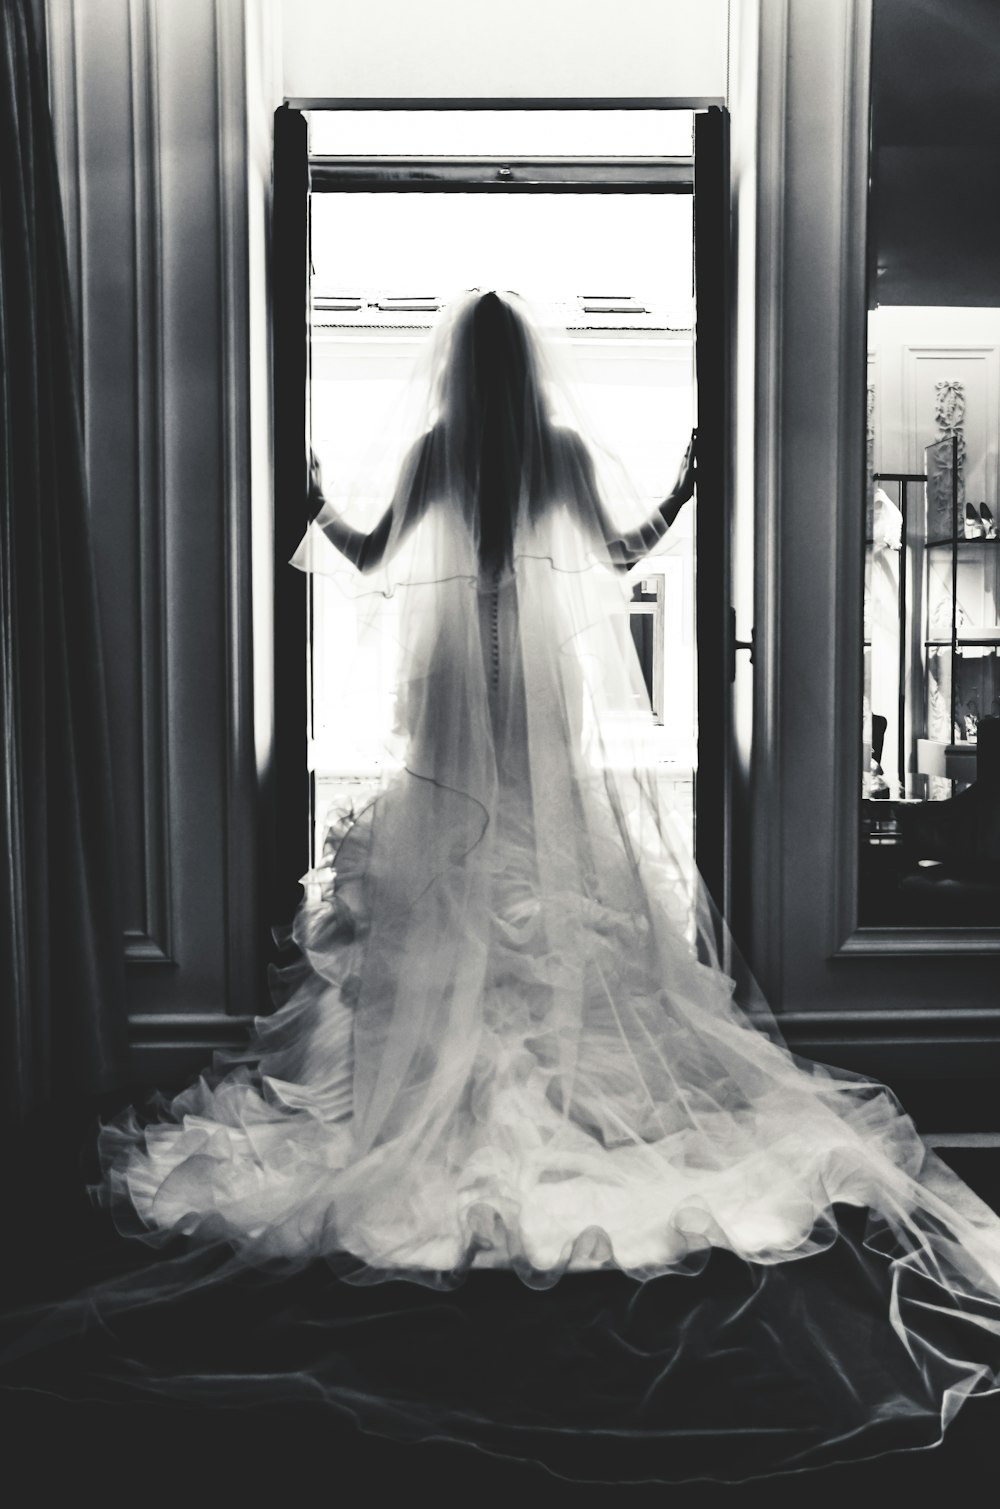 grayscale photography of woman wearing wedding gown standing near open window